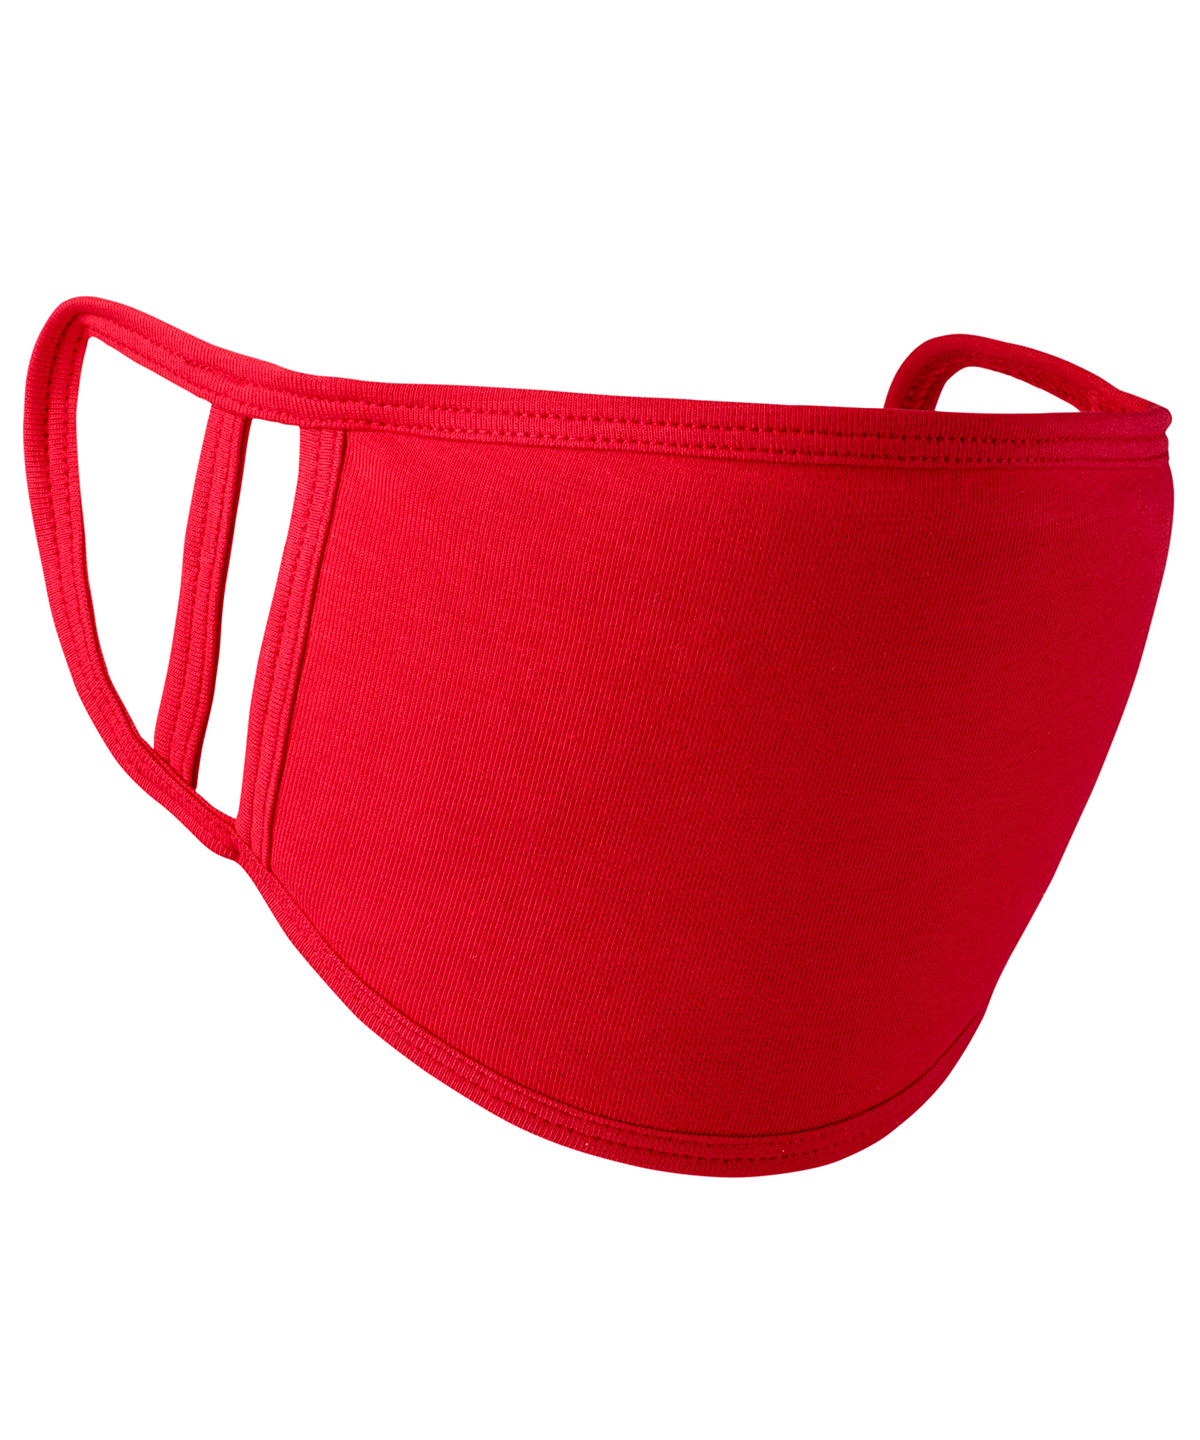 Washable 2-ply Face Covering in red